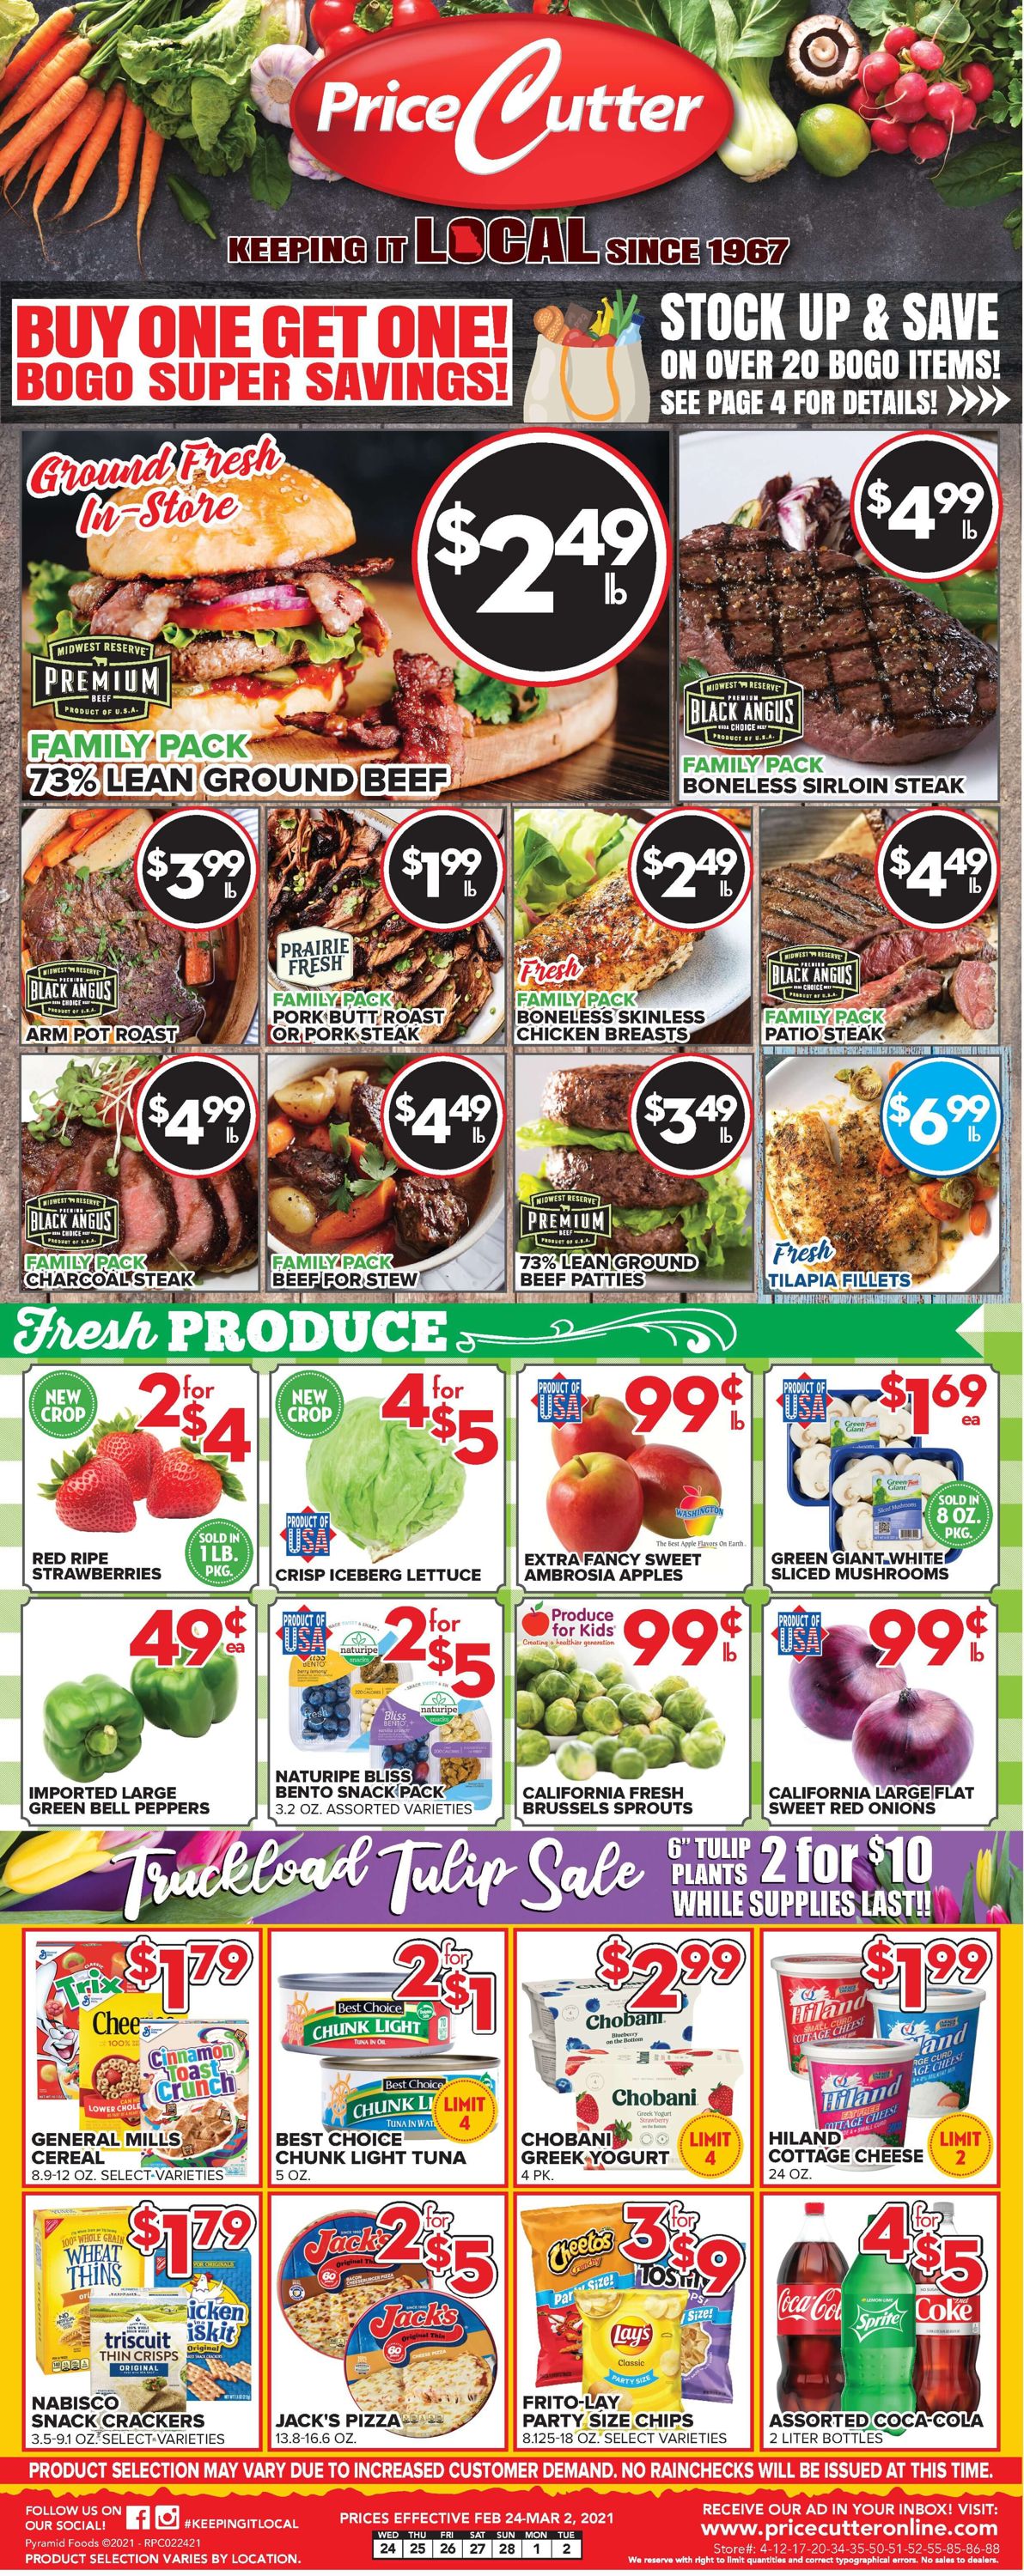 Price Cutter Weekly Ad Circular - valid 02/24-03/02/2021